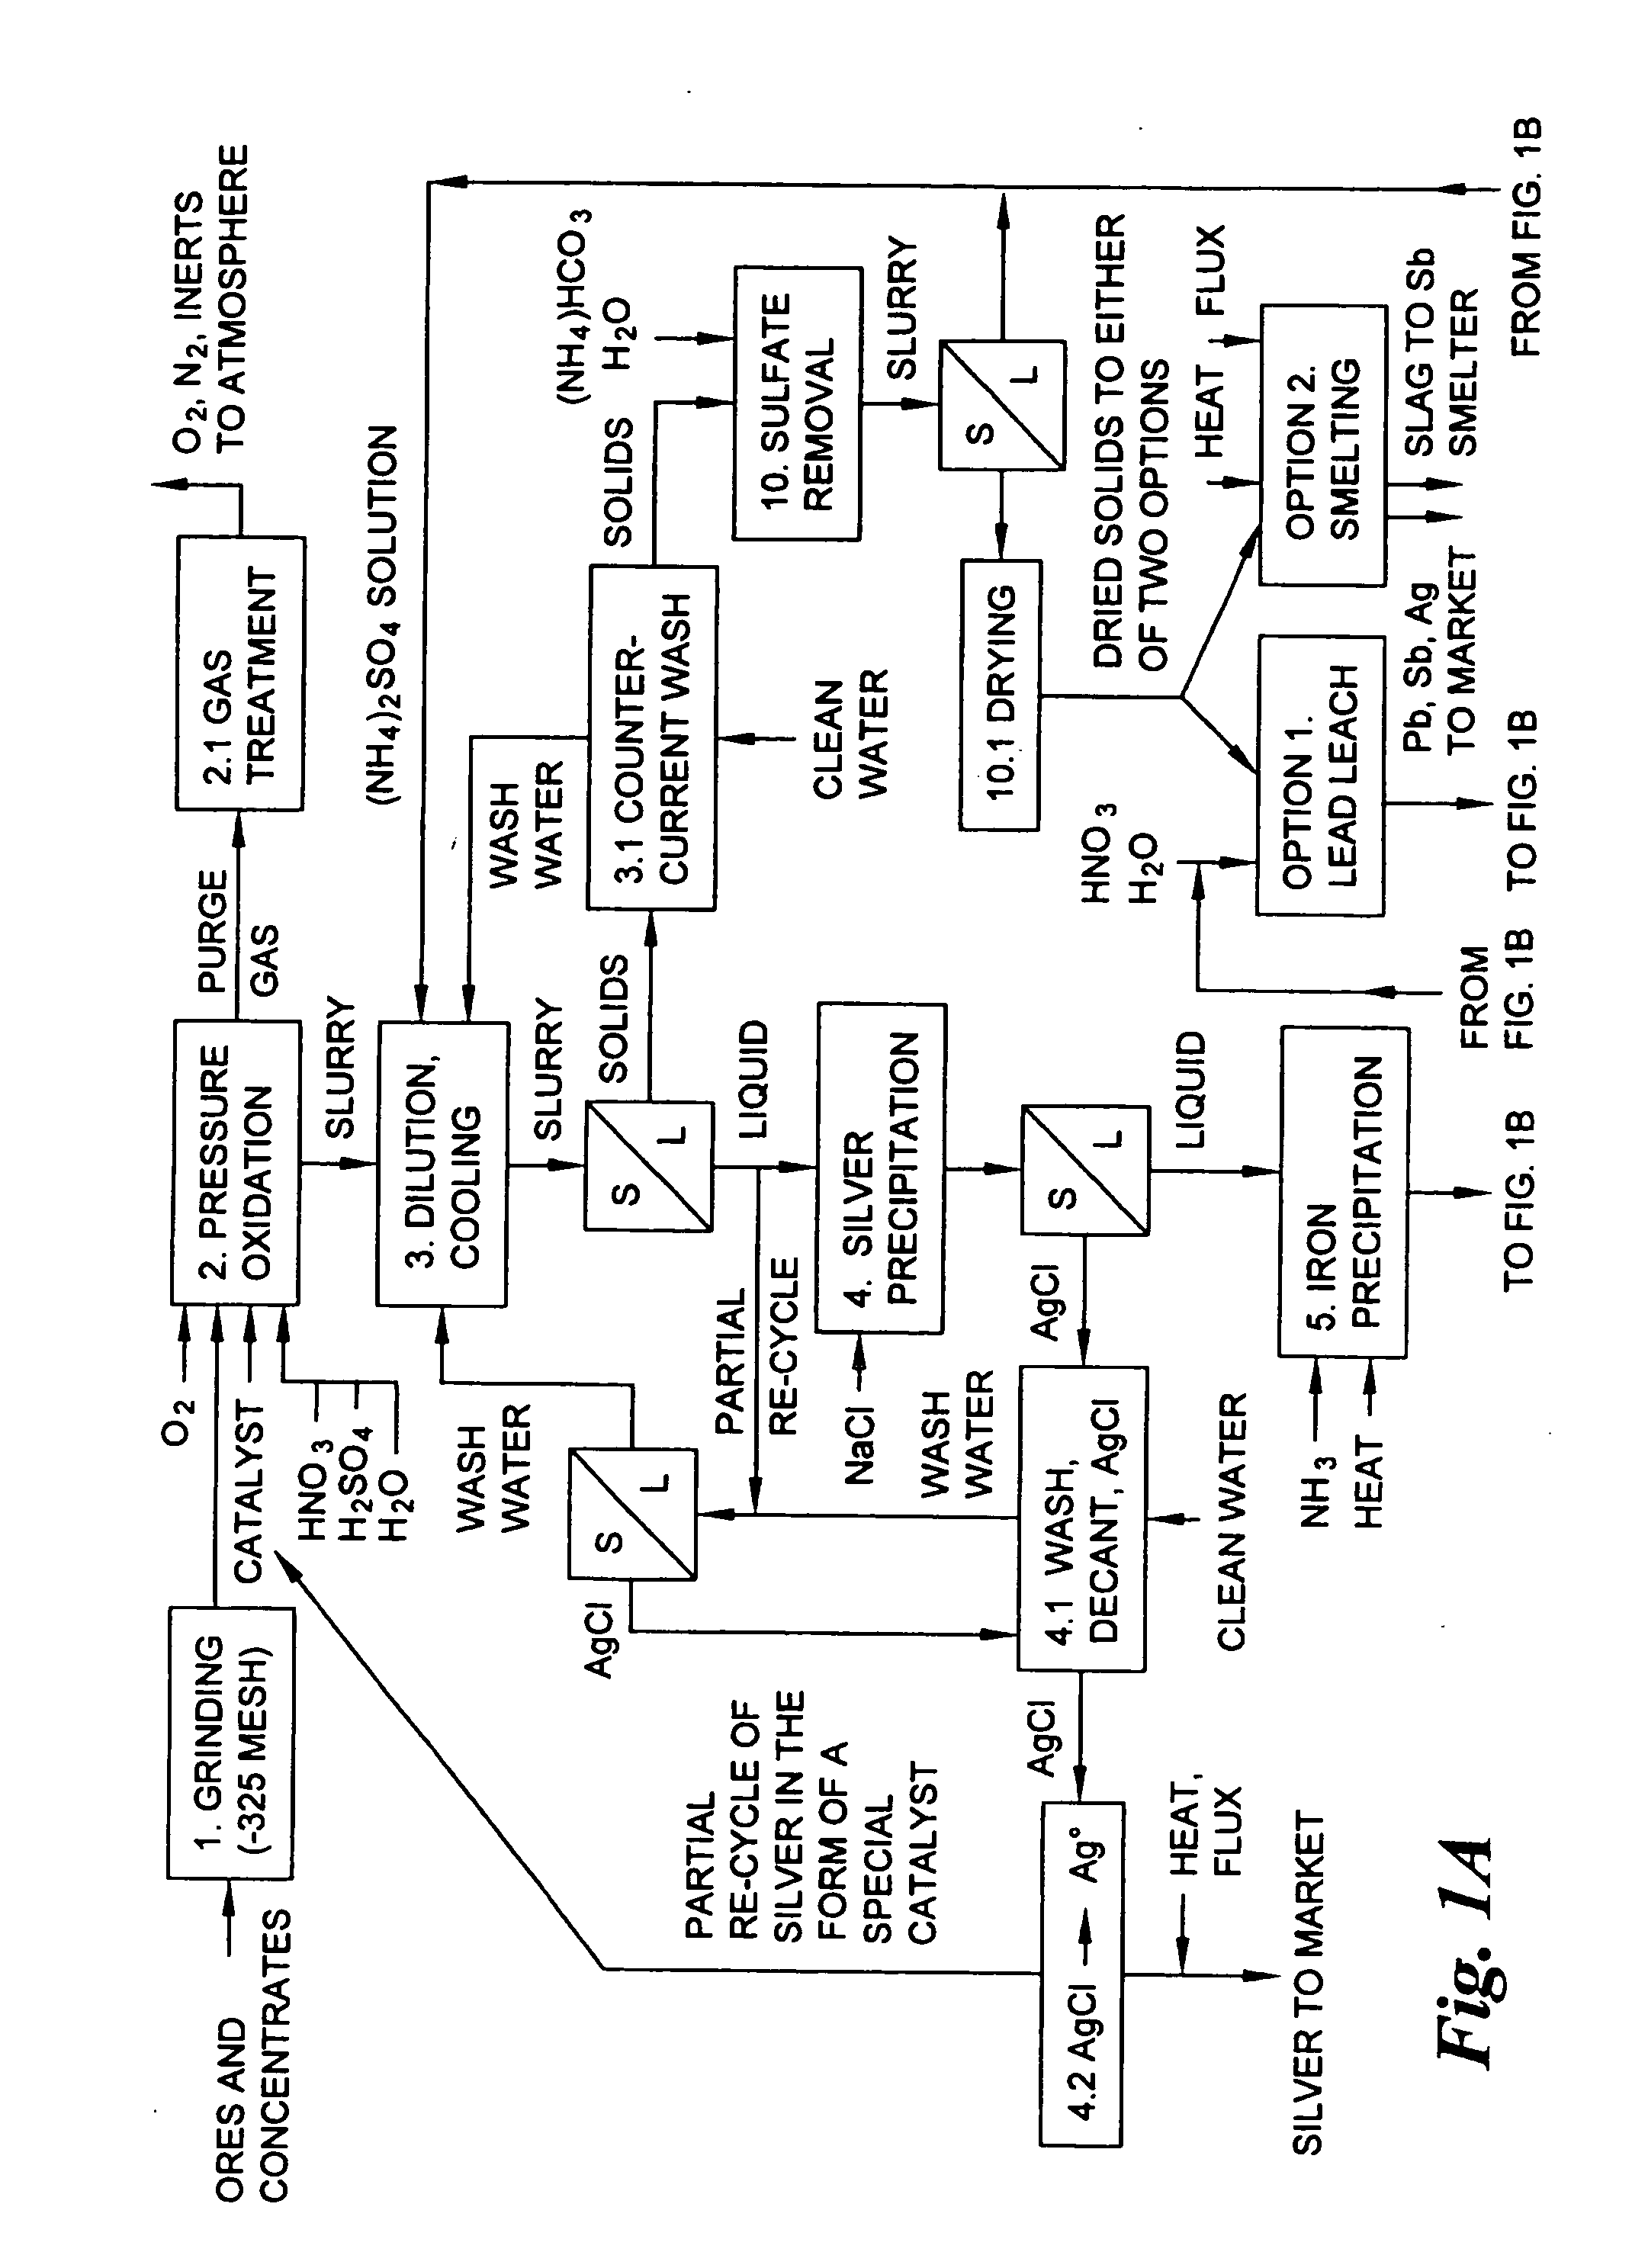 Hydrometallurgical process for the treatment of metal-bearing sulfide mineral concentrates